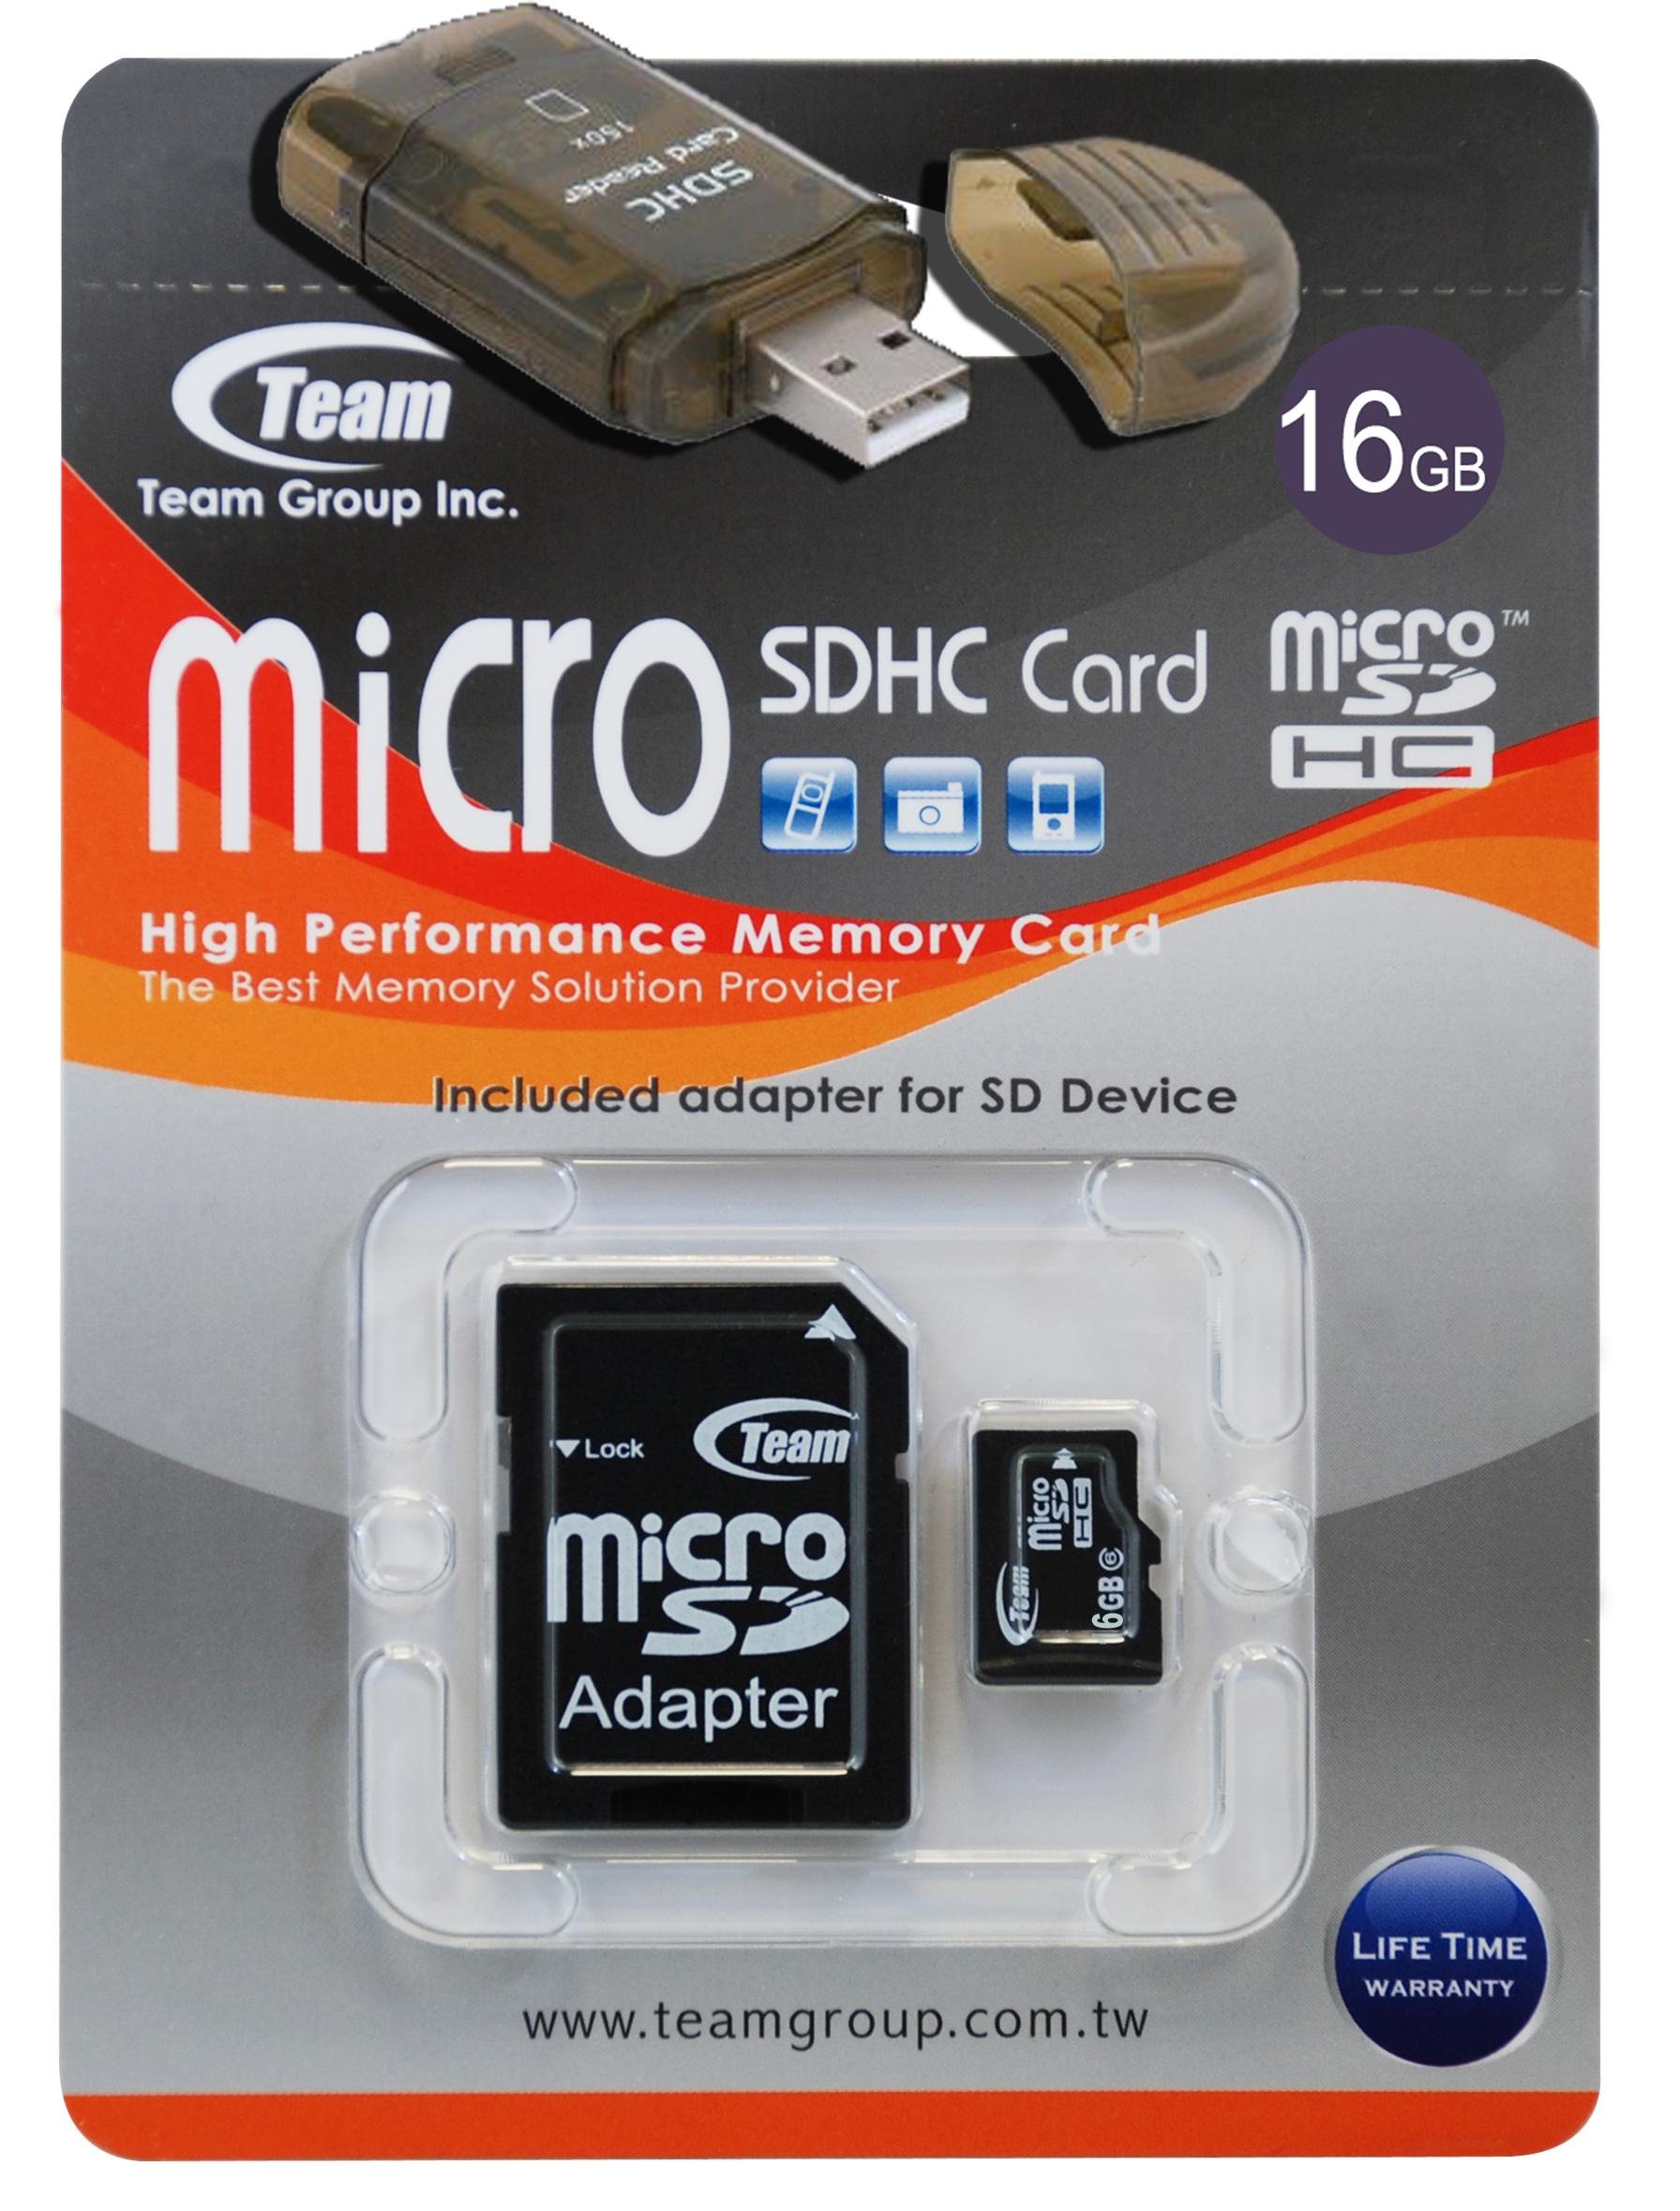 16GB Turbo Speed Class 6 MicroSDHC Memory Card For SAMSUNG COMEBACK SGH-T559. High Speed Card Comes with a free SD and USB Ad